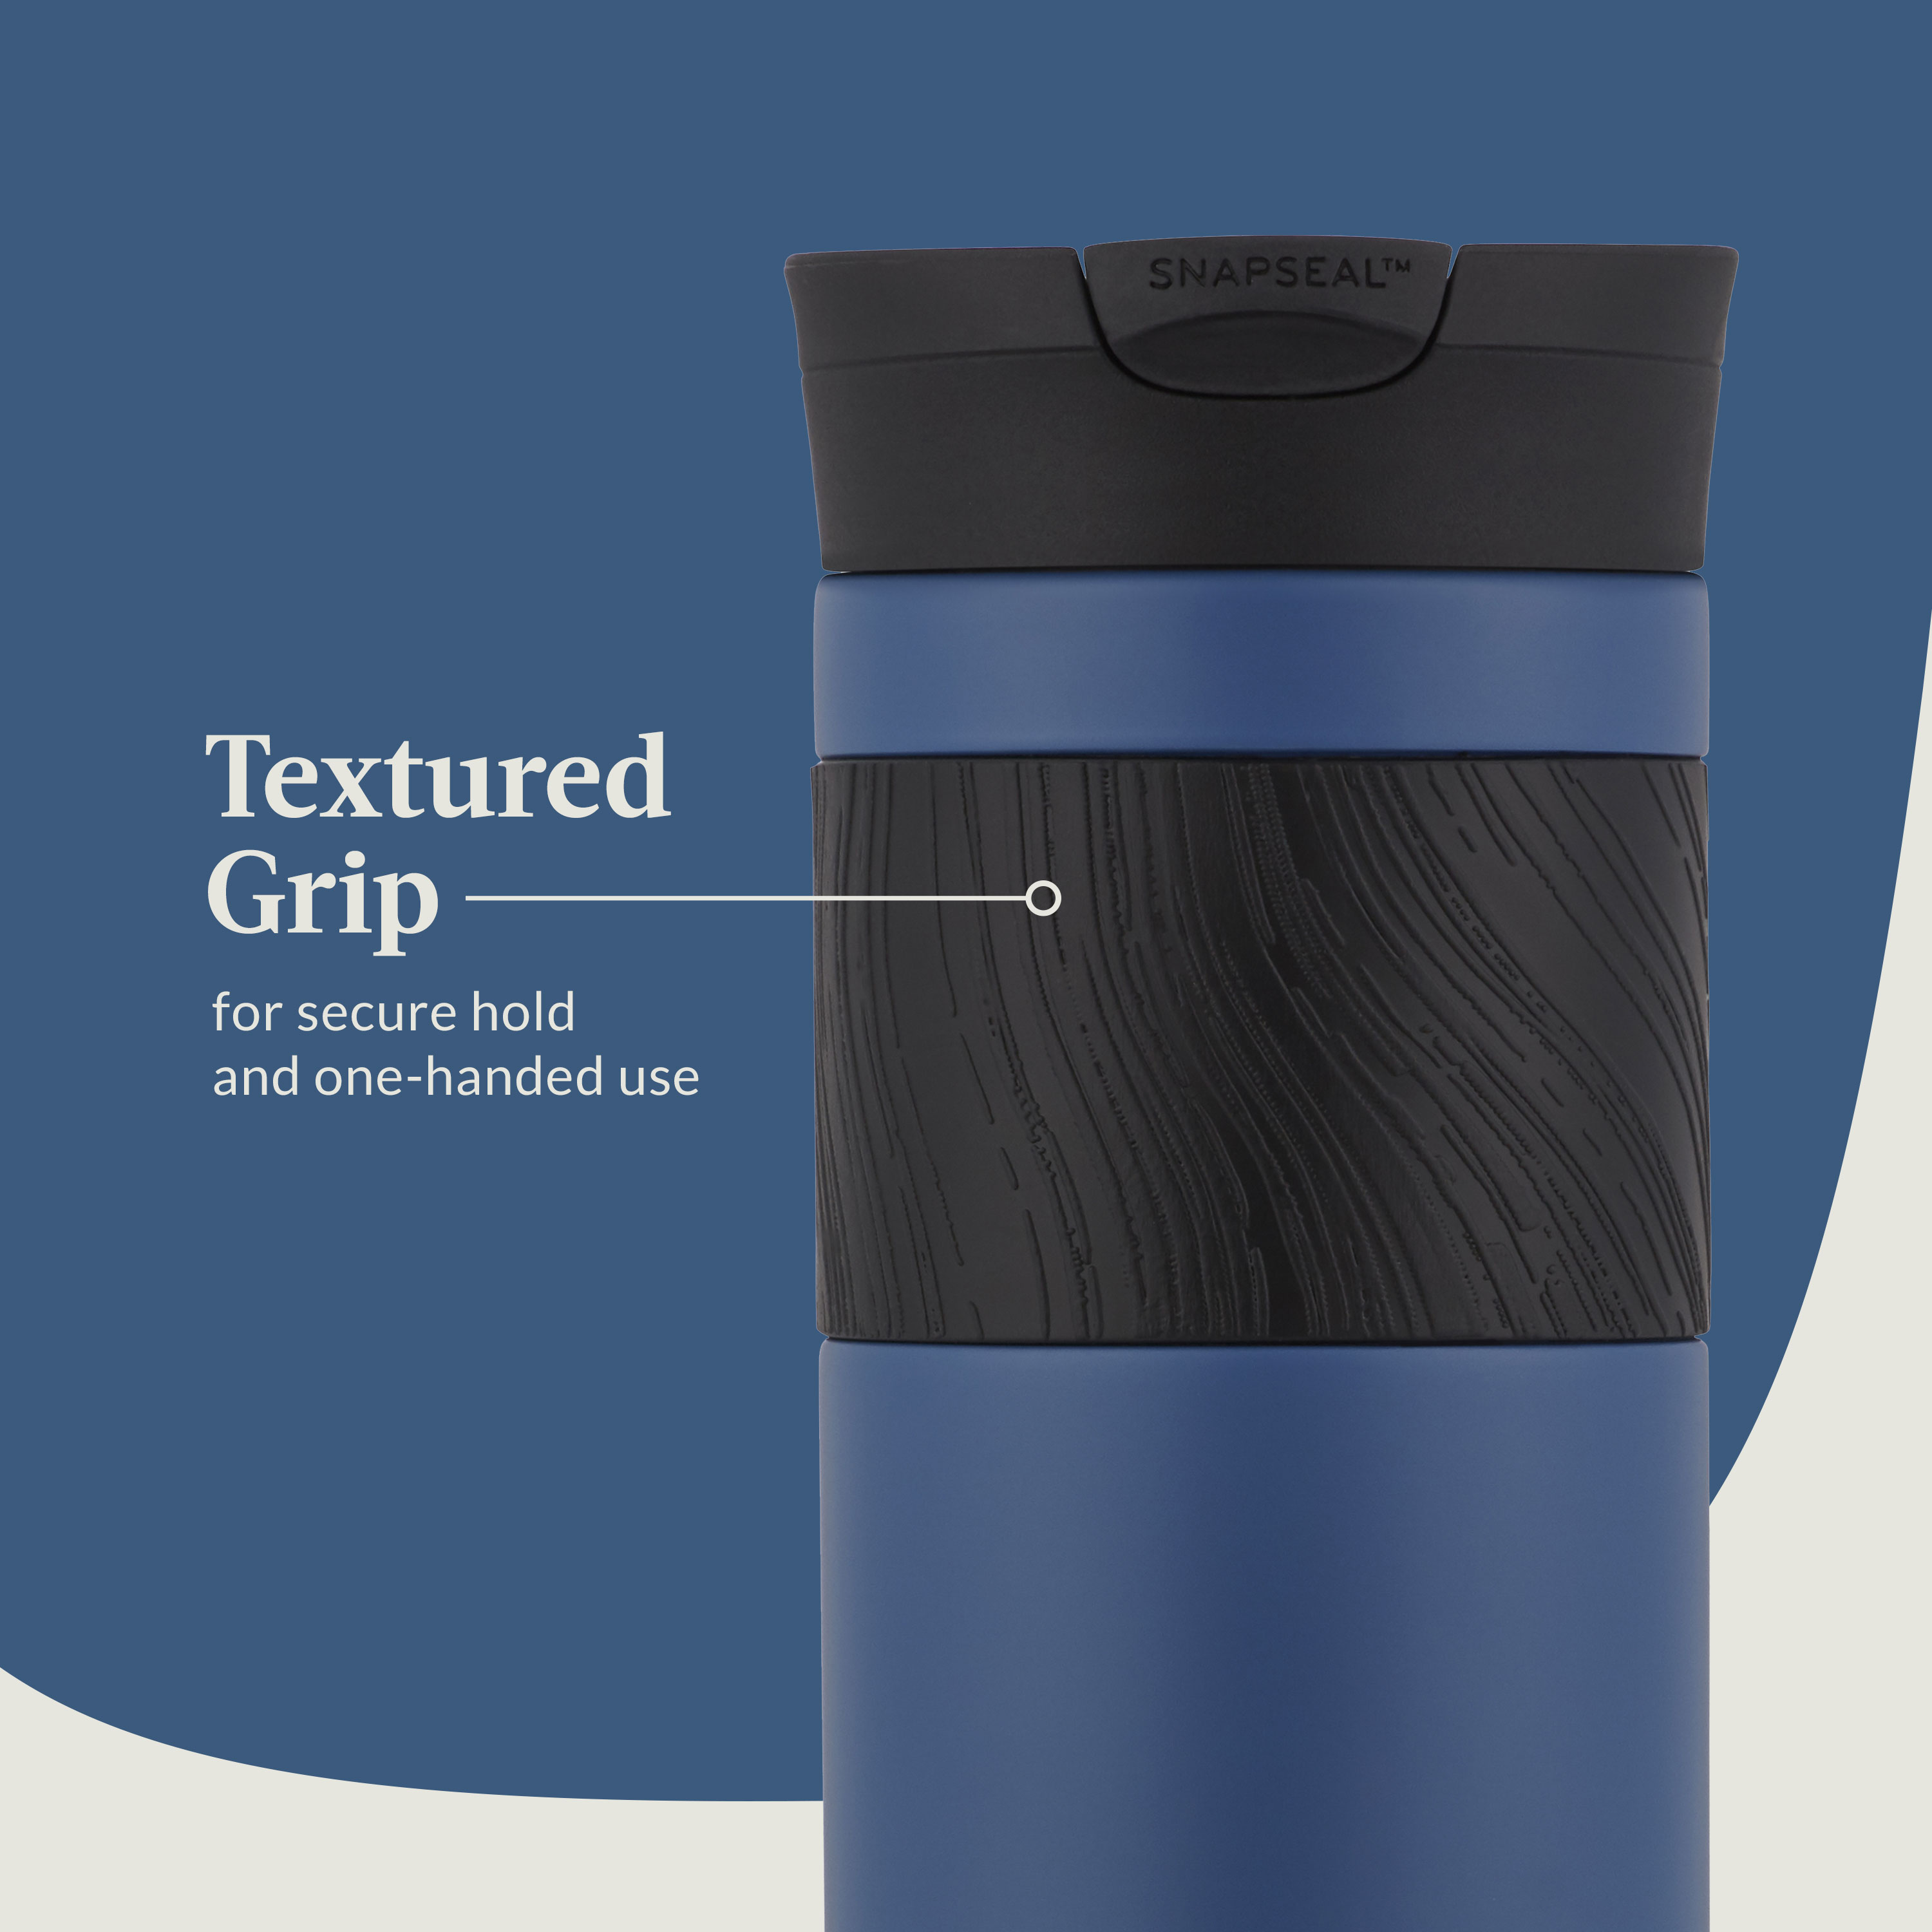 Contigo Byron 2.0 Stainless Steel Travel Mug with SNAPSEAL Lid and Grip Blue Corn, 20 fl oz. - image 5 of 6